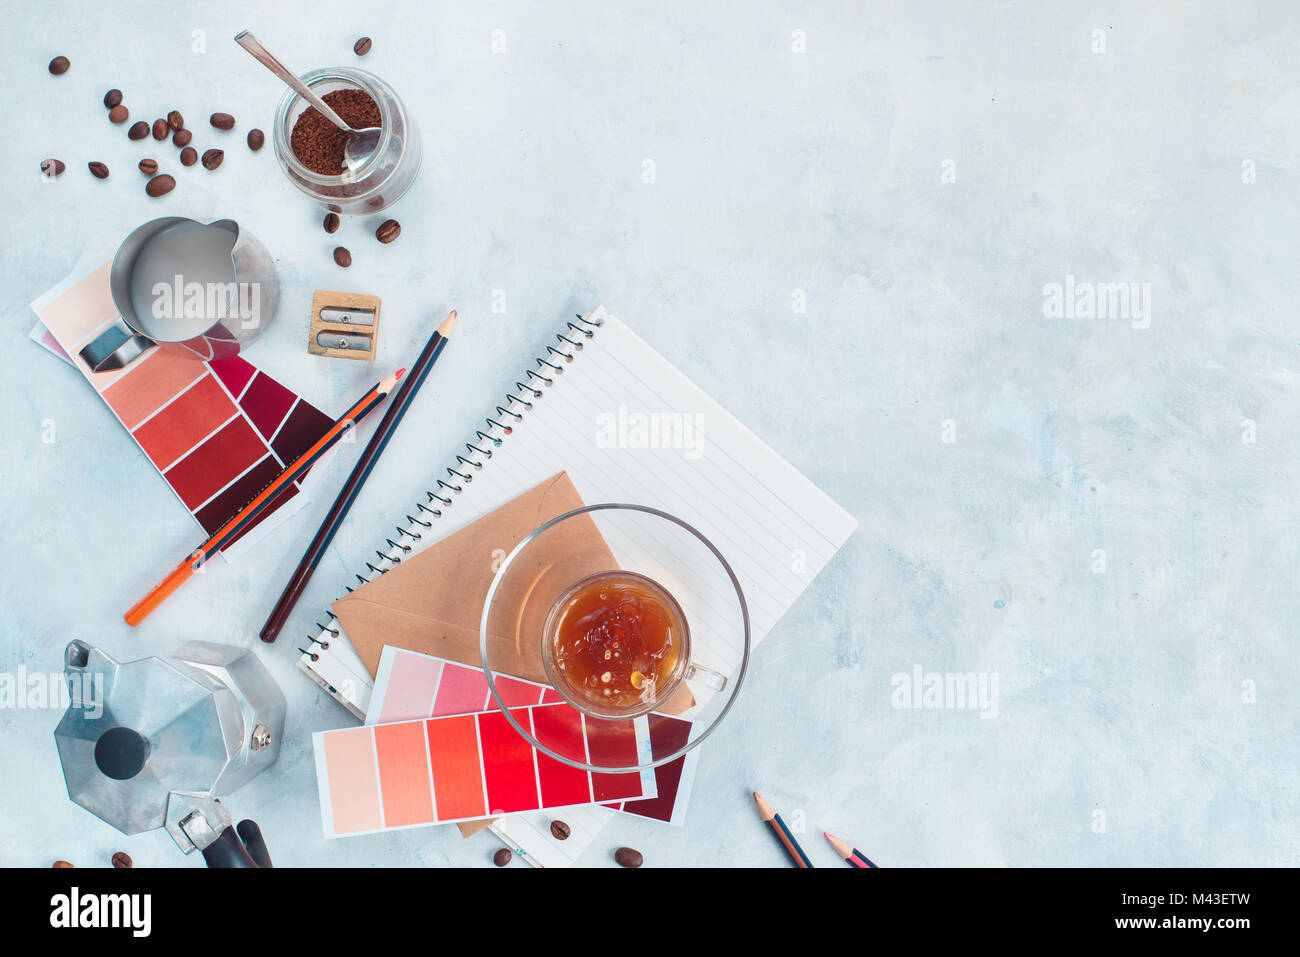 Designer workplace with coffee pot, color swatches, notes and coffee cups. Creative top view hot drink concept with copy space. Stock Photo